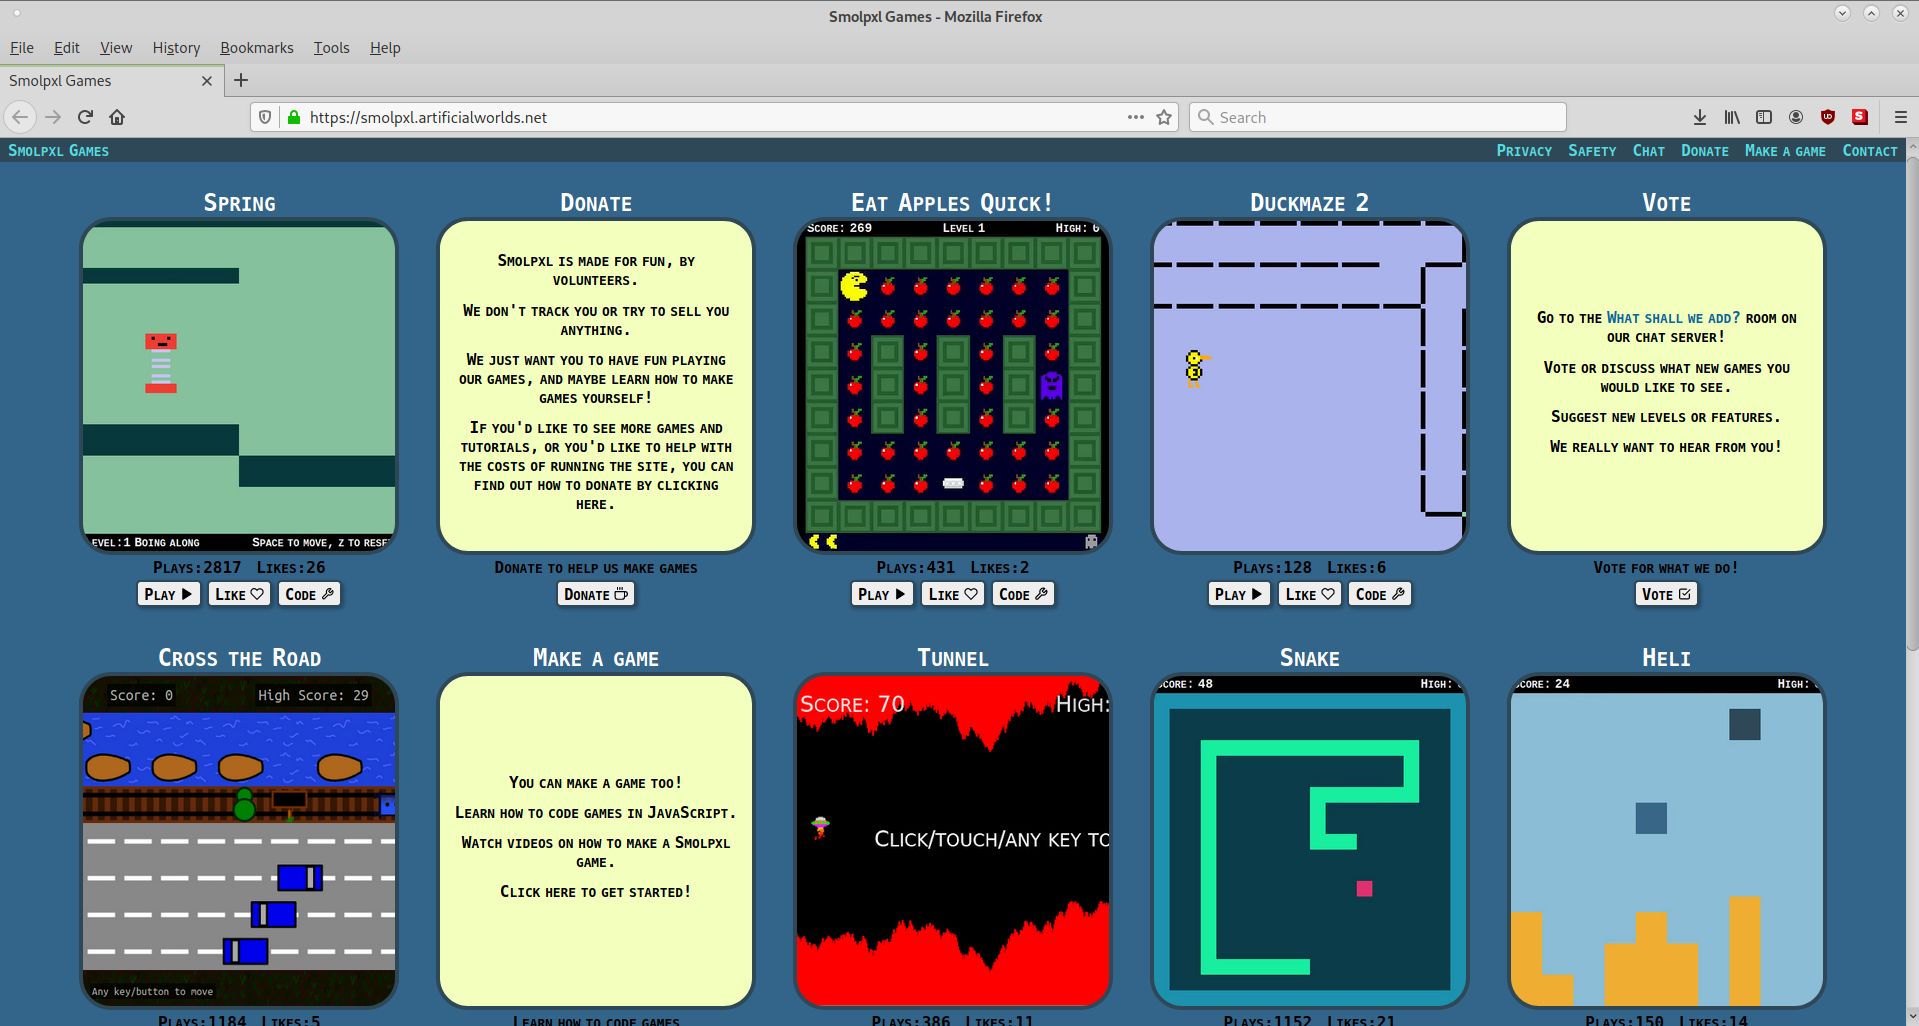 Play and create little retro games at Smolpxl – Andy Balaam's Blog